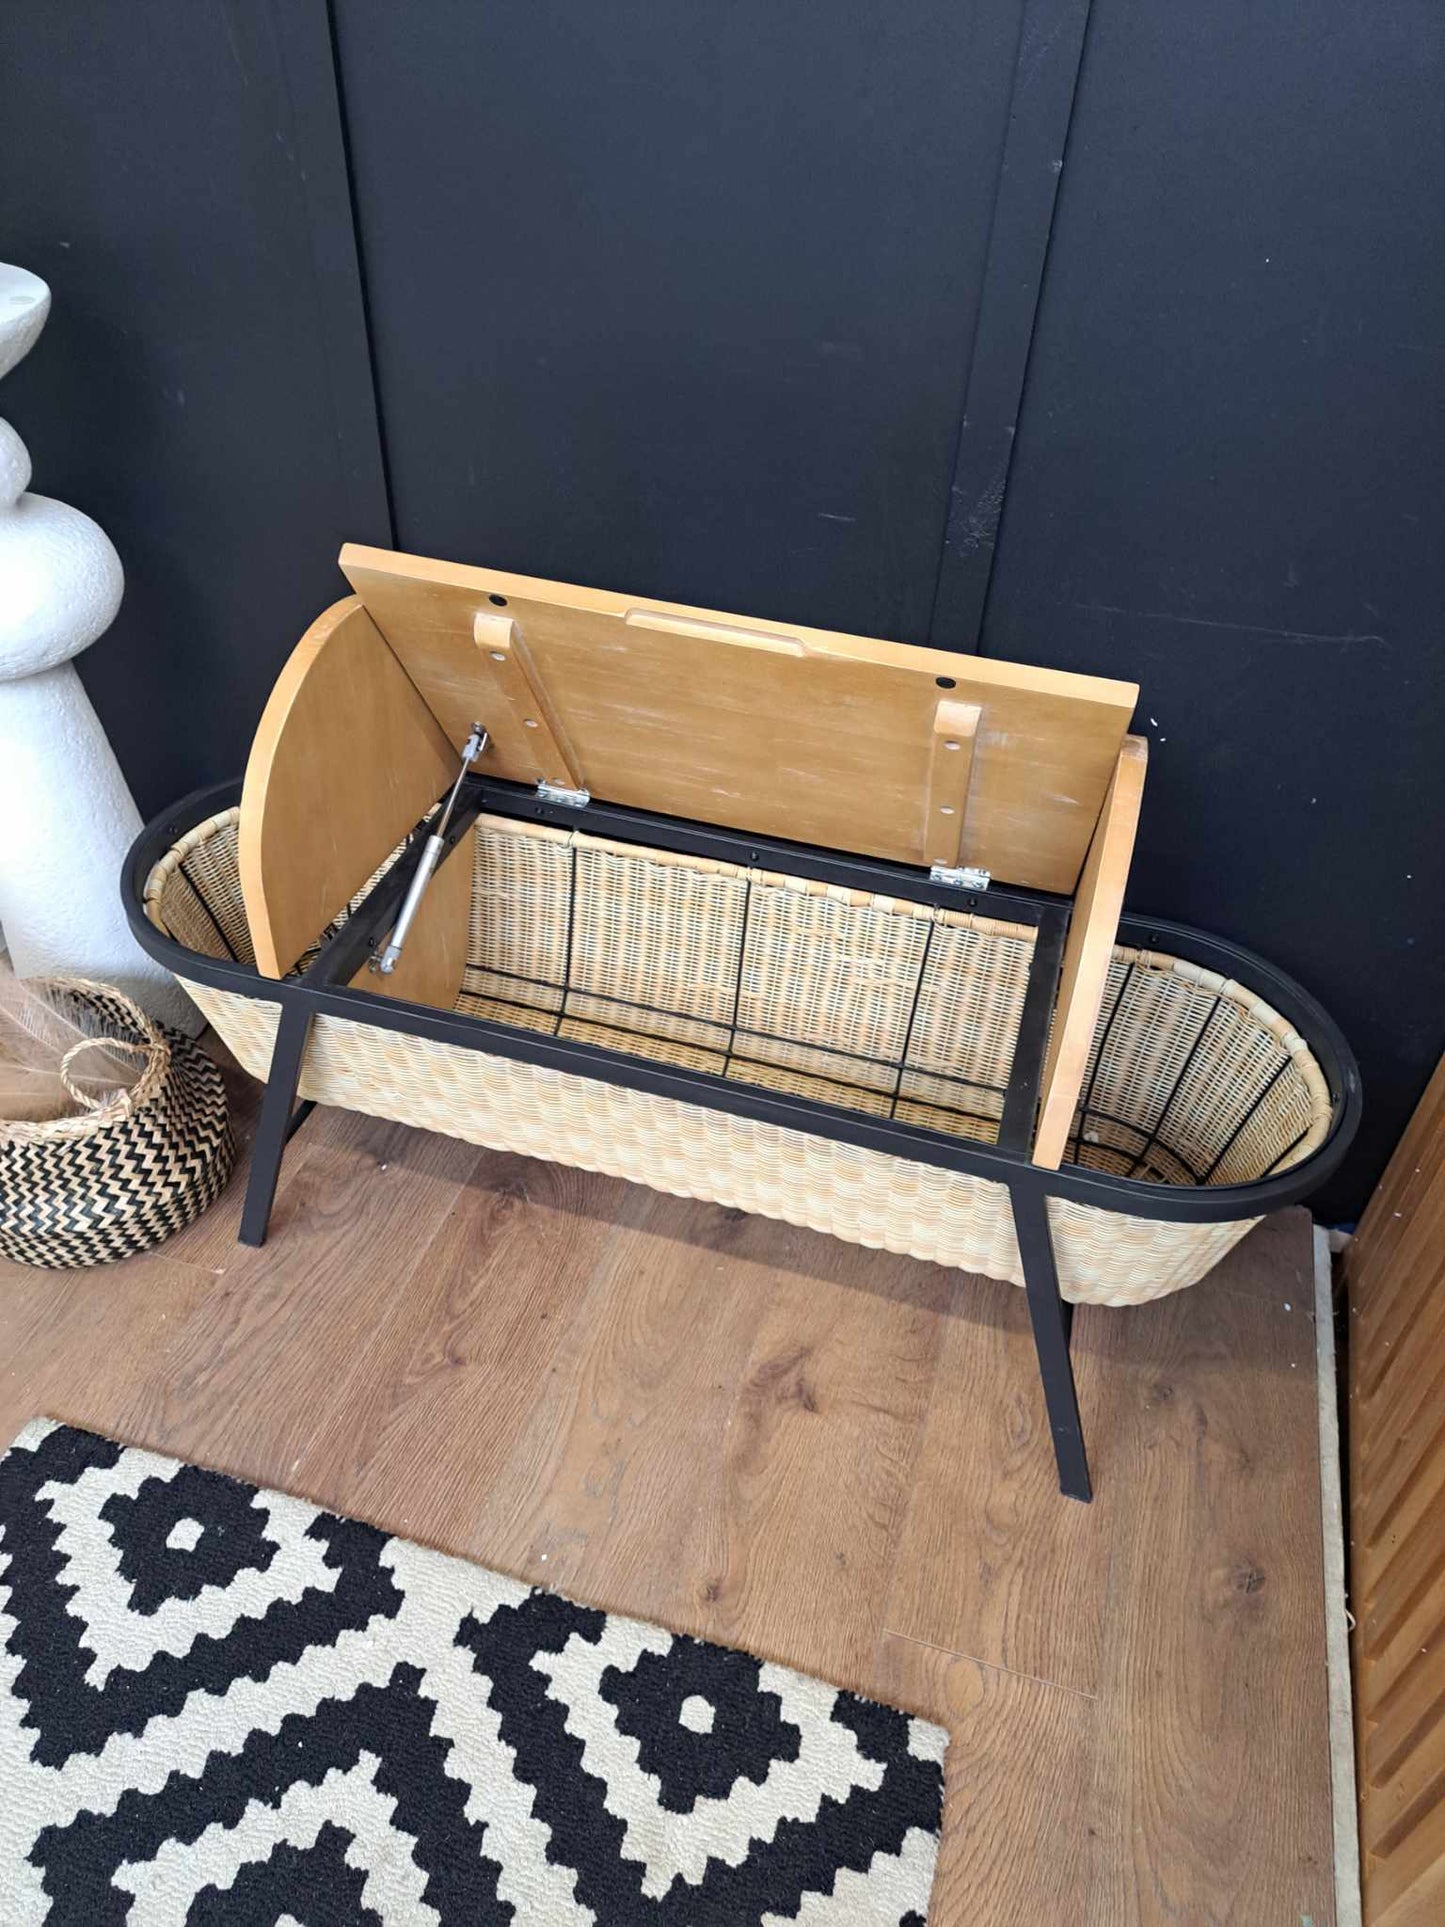 Storage Bench Solid Wood, Metal and Rattan